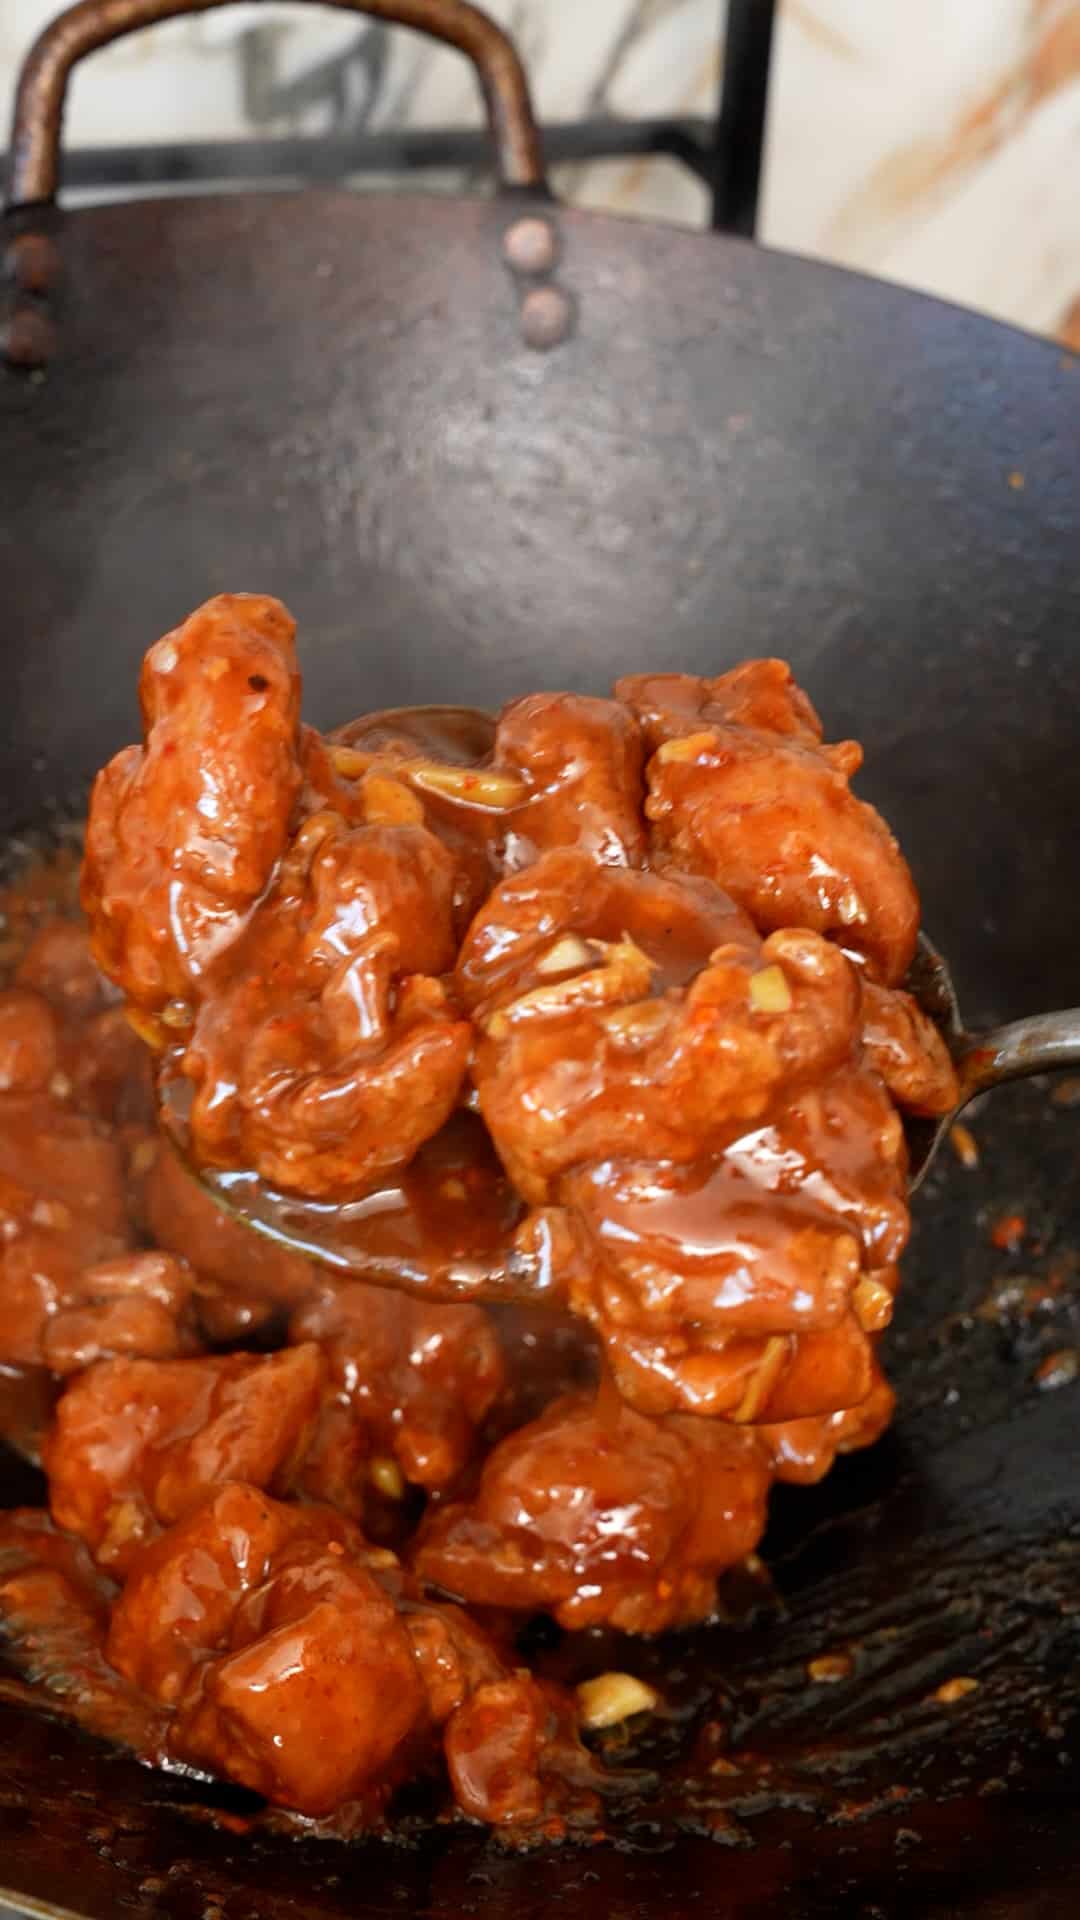 General Tso's Chicken coated in sauce in a wok.